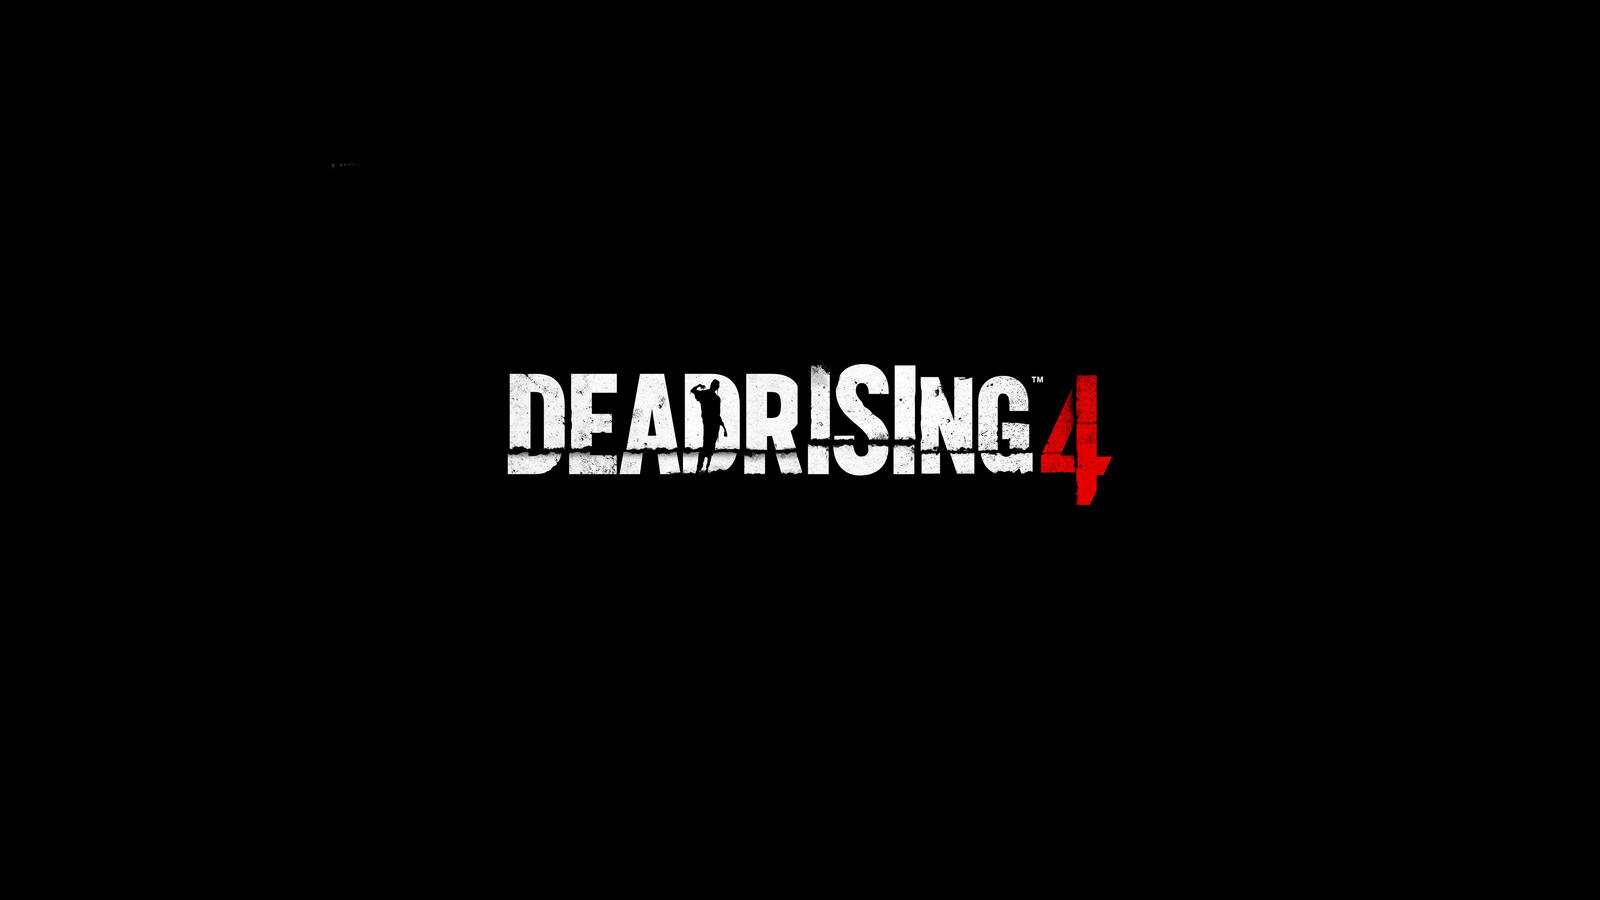 Free photo Dead rising 4 screensaver with black background